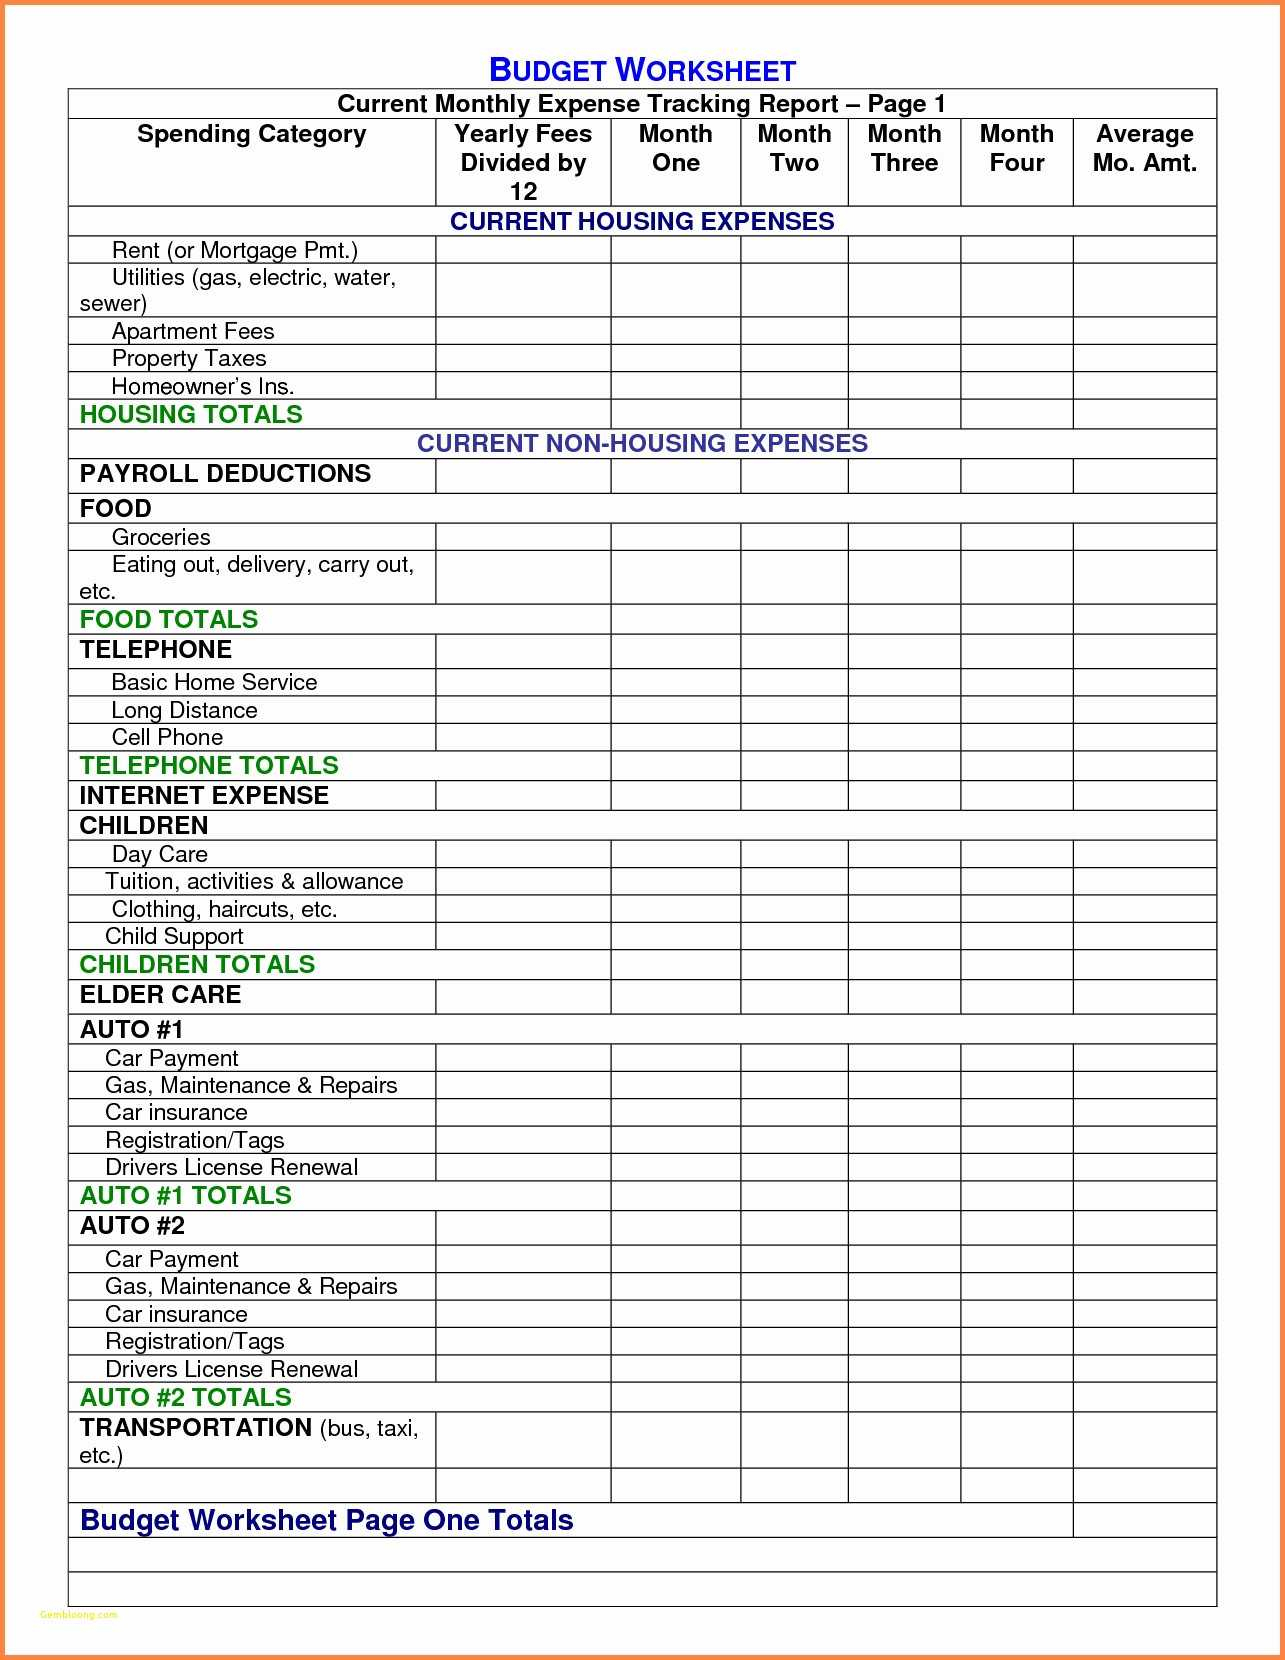 Aircraft Operating Cost Spreadsheet For Aircraft Operating Cost Spreadsheet  Awal Mula